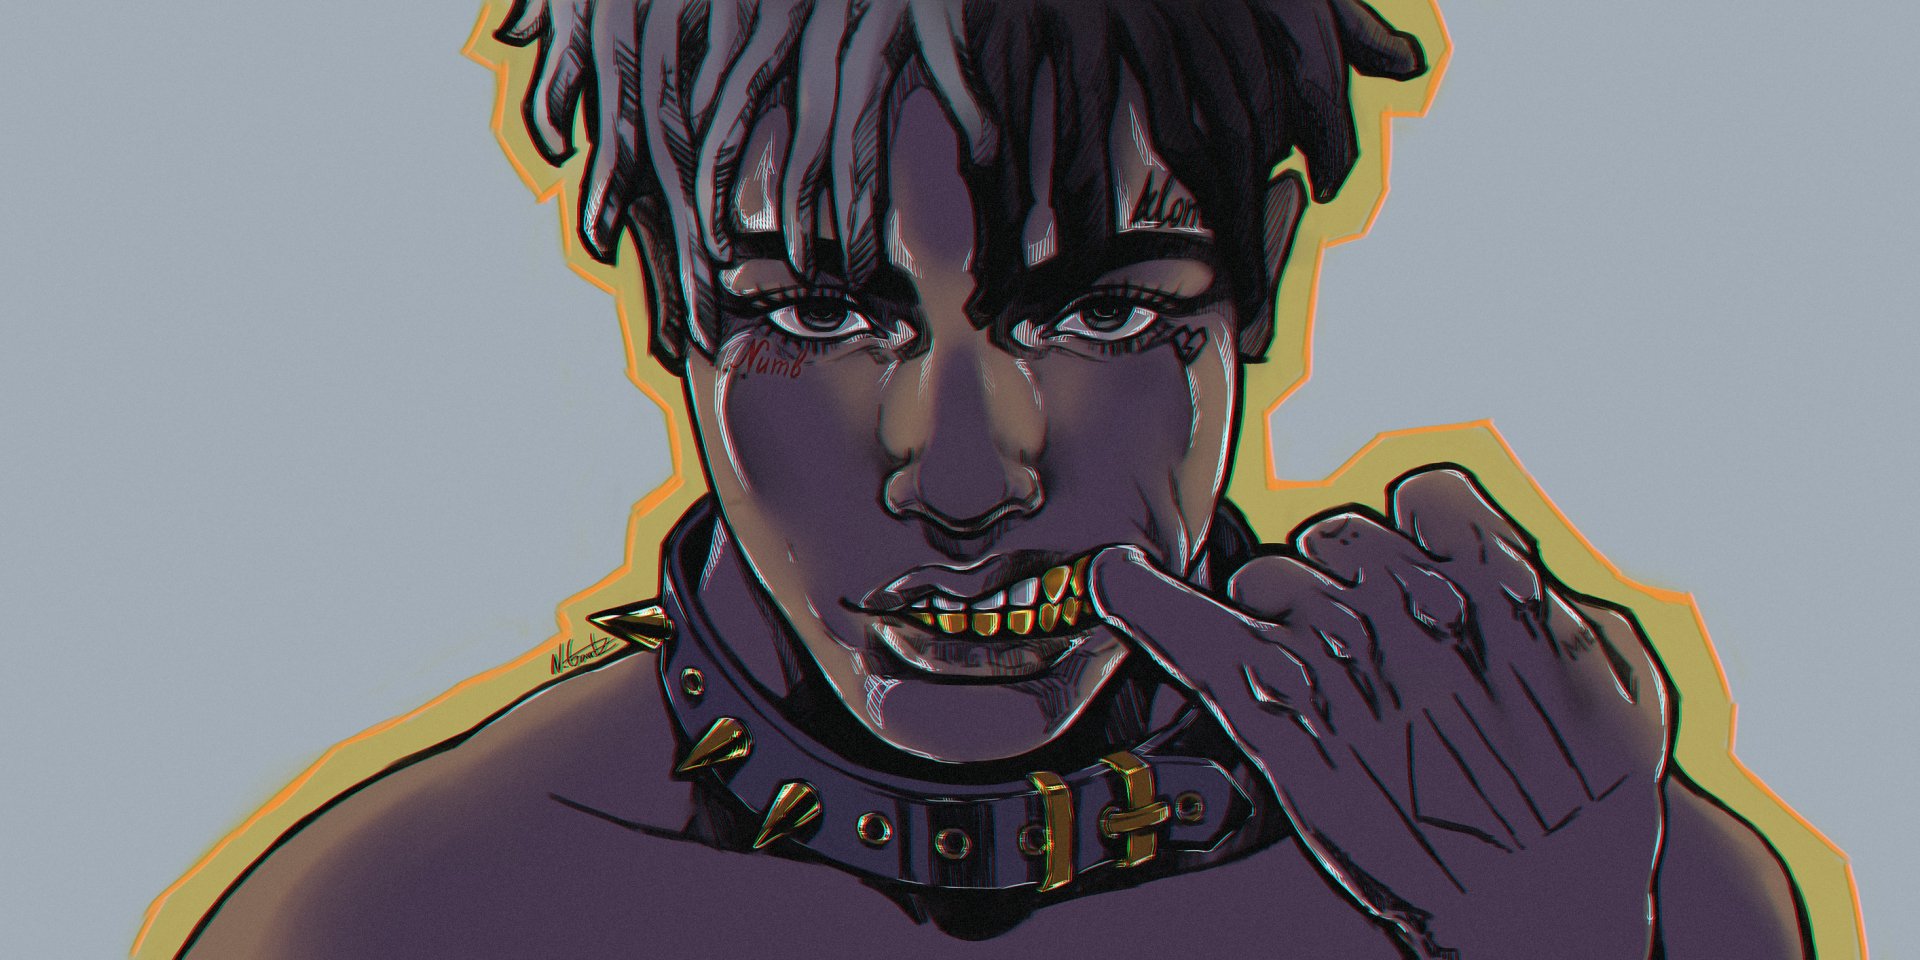 HD desktop wallpaper of an illustrated XXXTentacion with a gold grill and spiked choker, set against a stylized background.